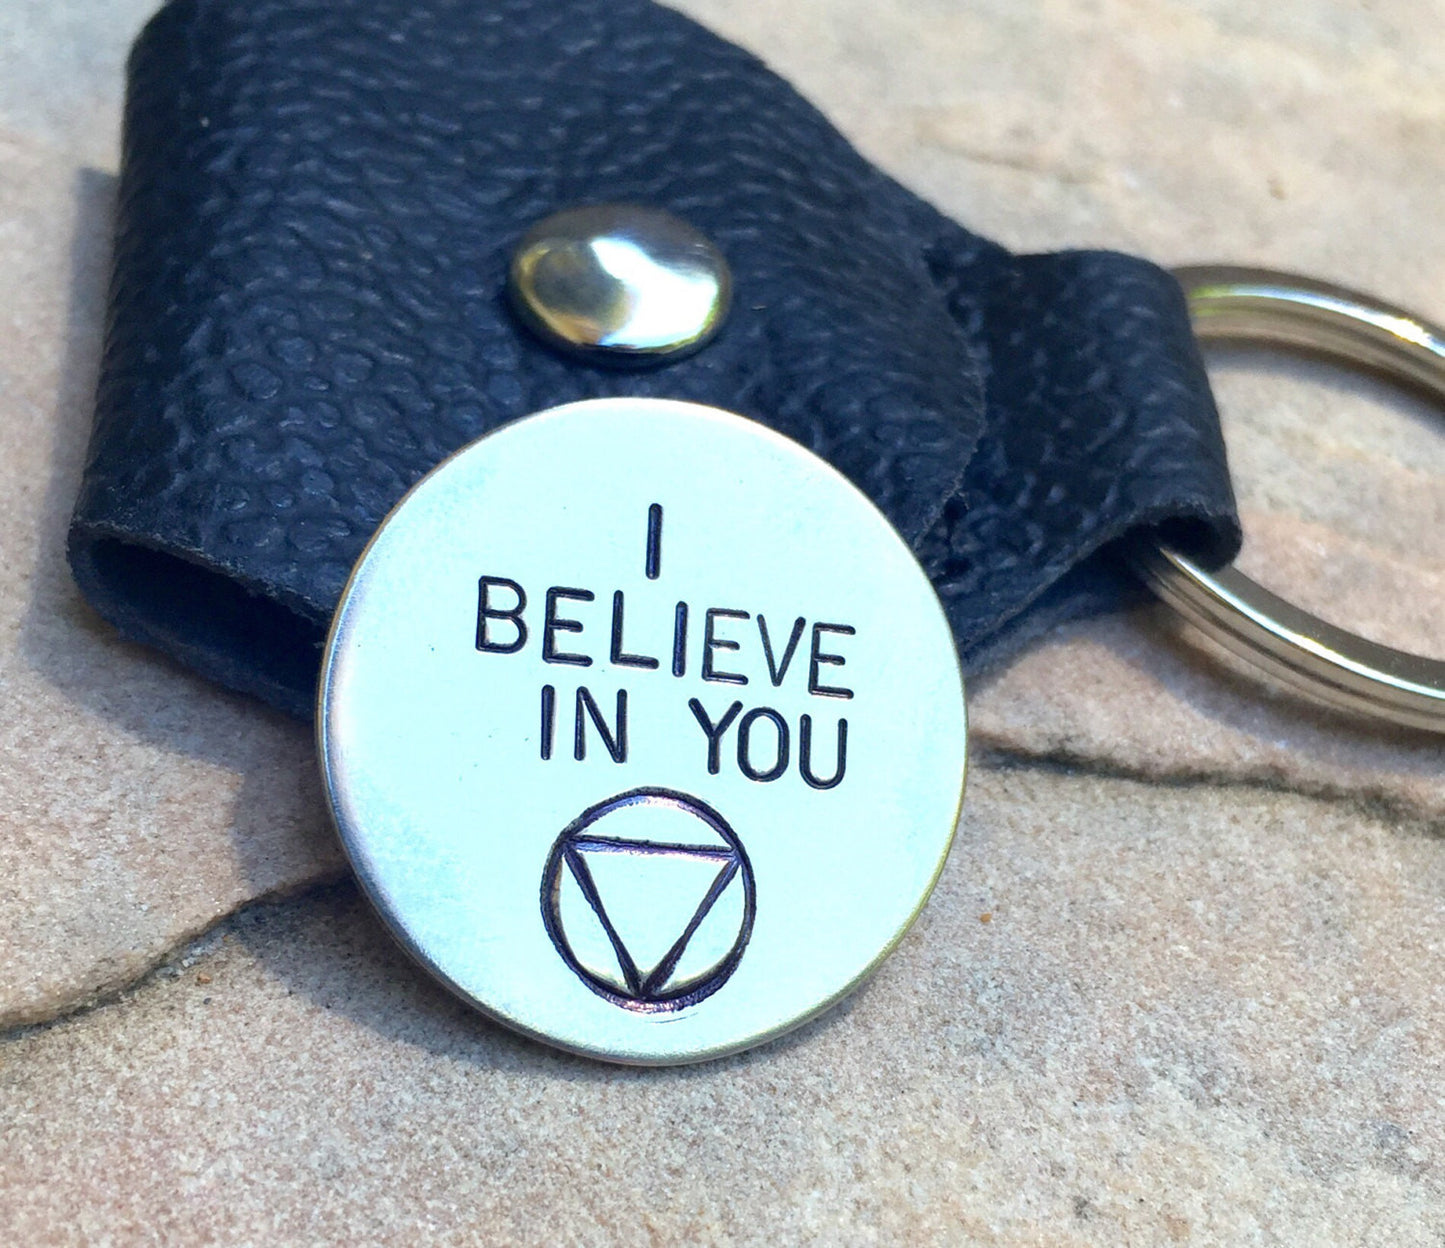 One Day At  Time, I Believe In You, Recovery Gift, Sobriety Gift - Natashaaloha, jewelry, bracelets, necklace, keychains, fishing lures, gifts for men, charms, personalized, 